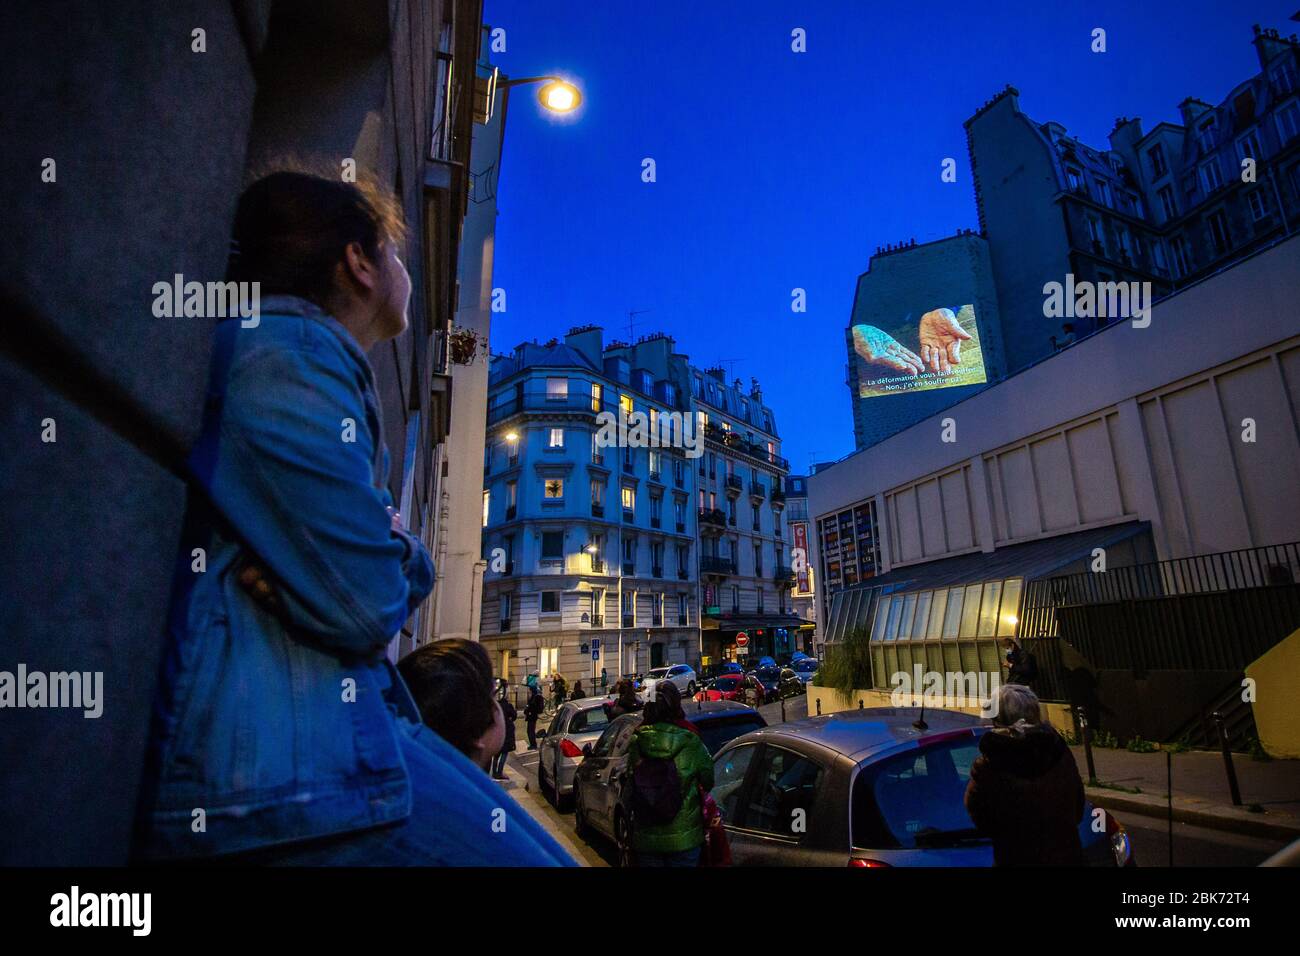 Paris, France. 1st May, 2020. Residents watch a film screened on the wall at the rue Daubenton in Paris, France, May 1, 2020. Every Friday evening, the independent cinema La Clef in the 5th arrondissement in Paris screens a film on a wall in the rue Daubenton for the inhabitants of the neighbourhood, during a strict lockdown to stop the spread of COVID-19. Credit: Aurelien Morissard/Xinhua/Alamy Live News Stock Photo